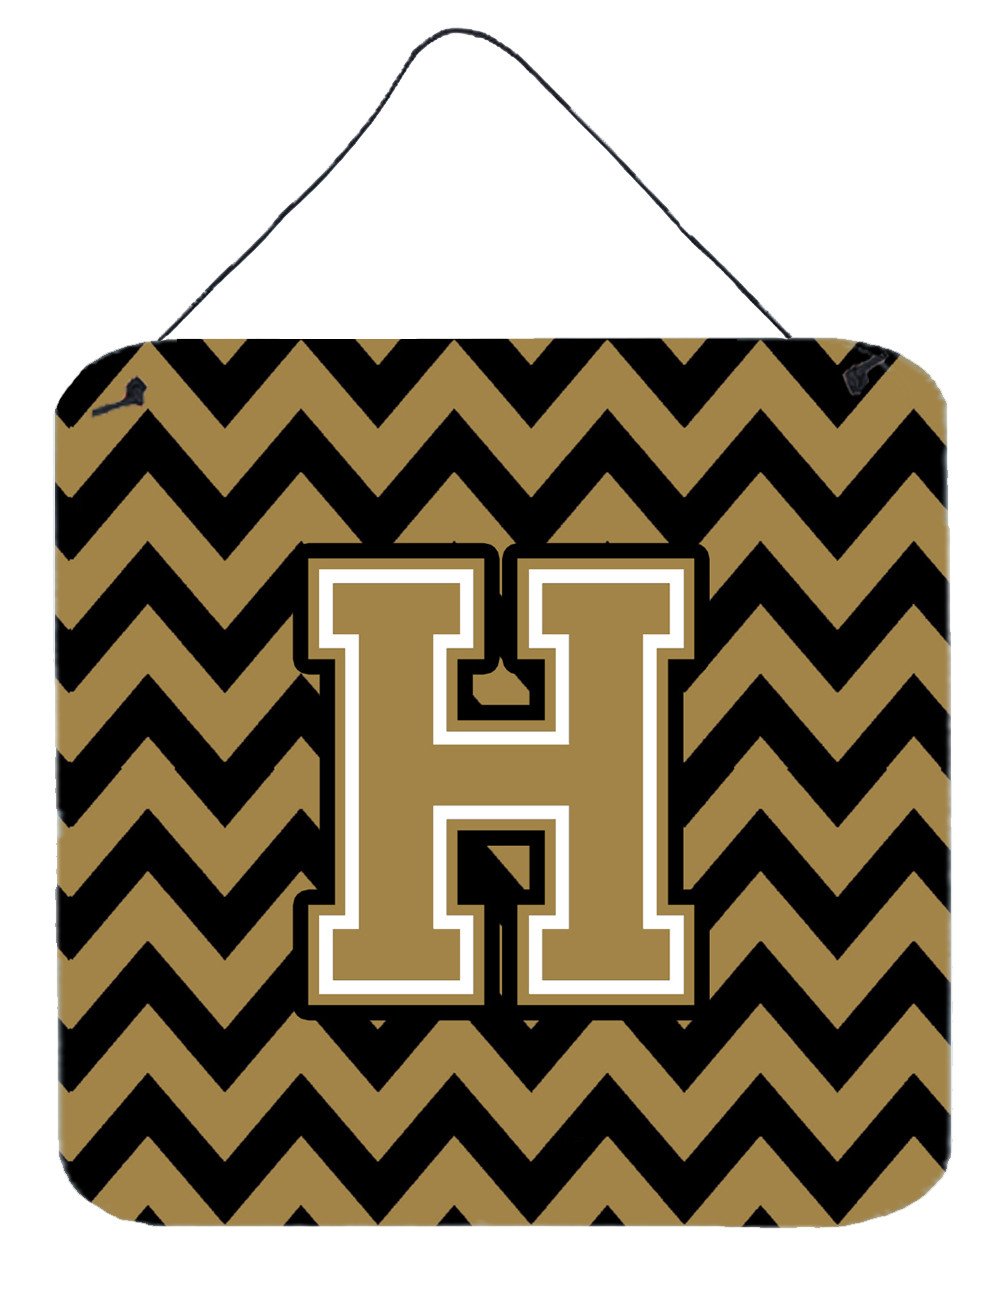 Letter H Chevron Black and Gold  Wall or Door Hanging Prints CJ1050-HDS66 by Caroline's Treasures